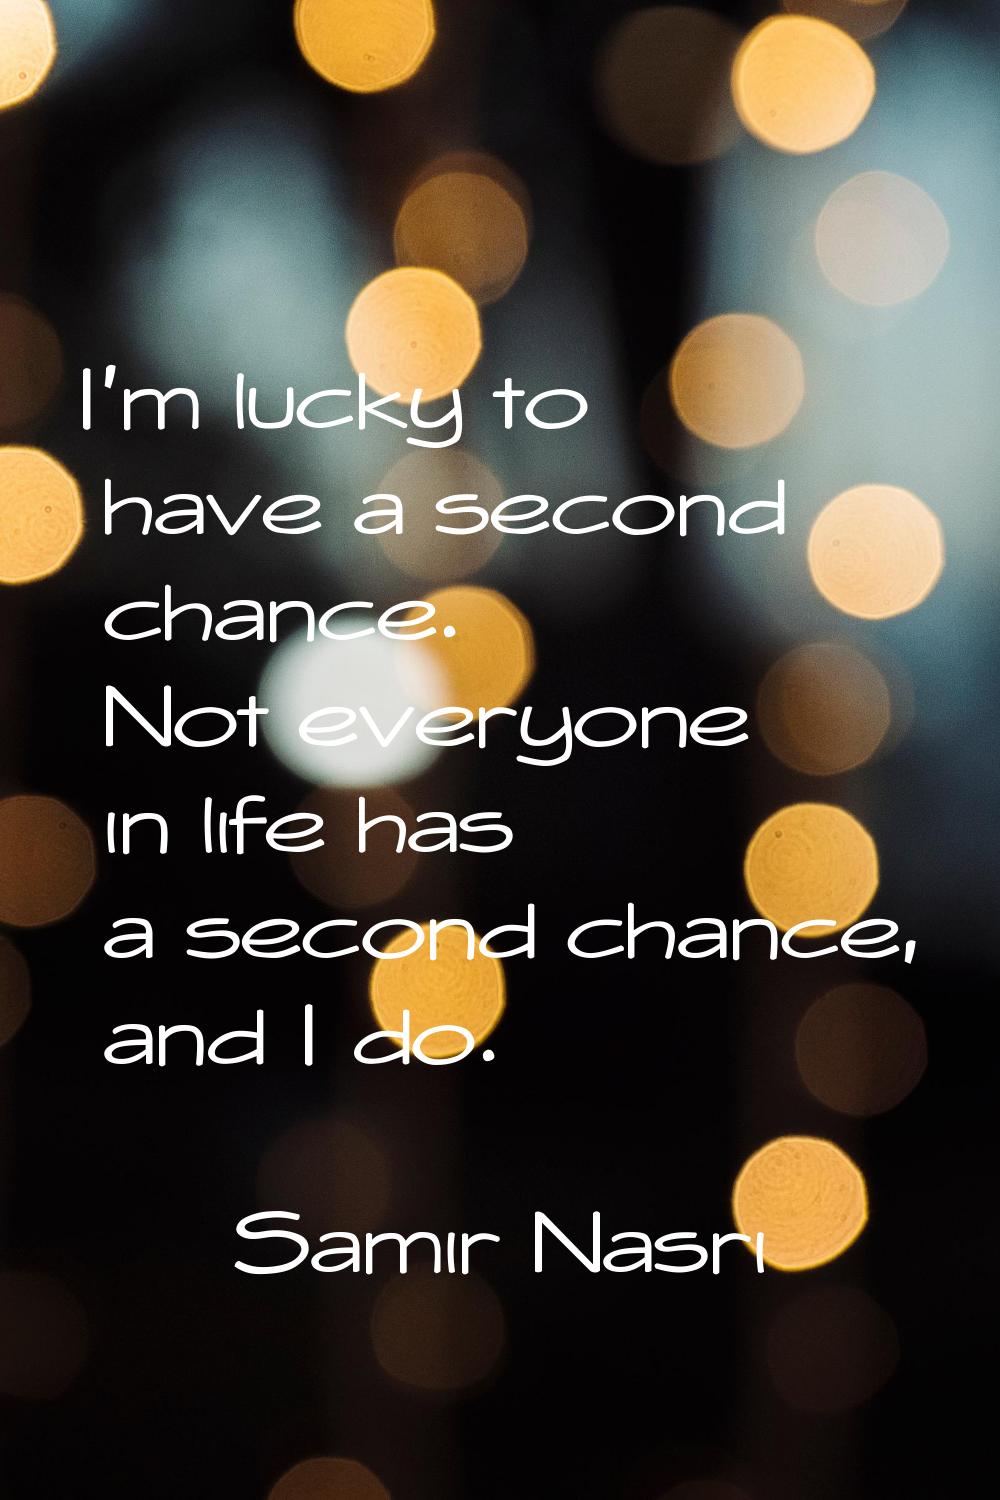 I'm lucky to have a second chance. Not everyone in life has a second chance, and I do.